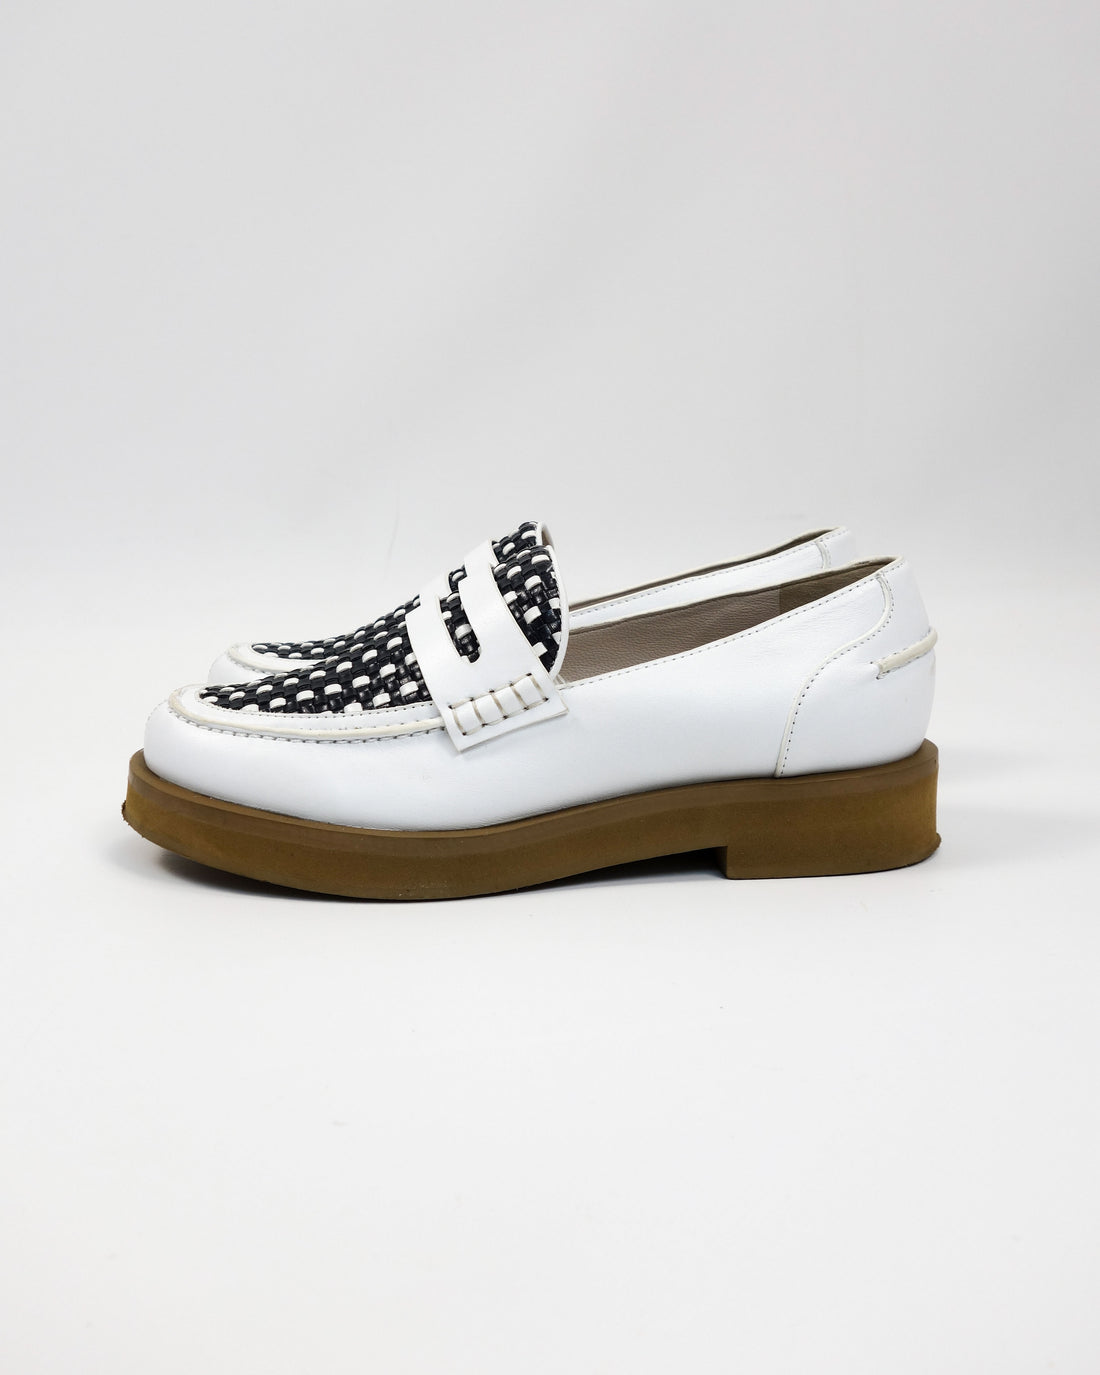 Jil Sander Navy White Leather Loafers 2000's